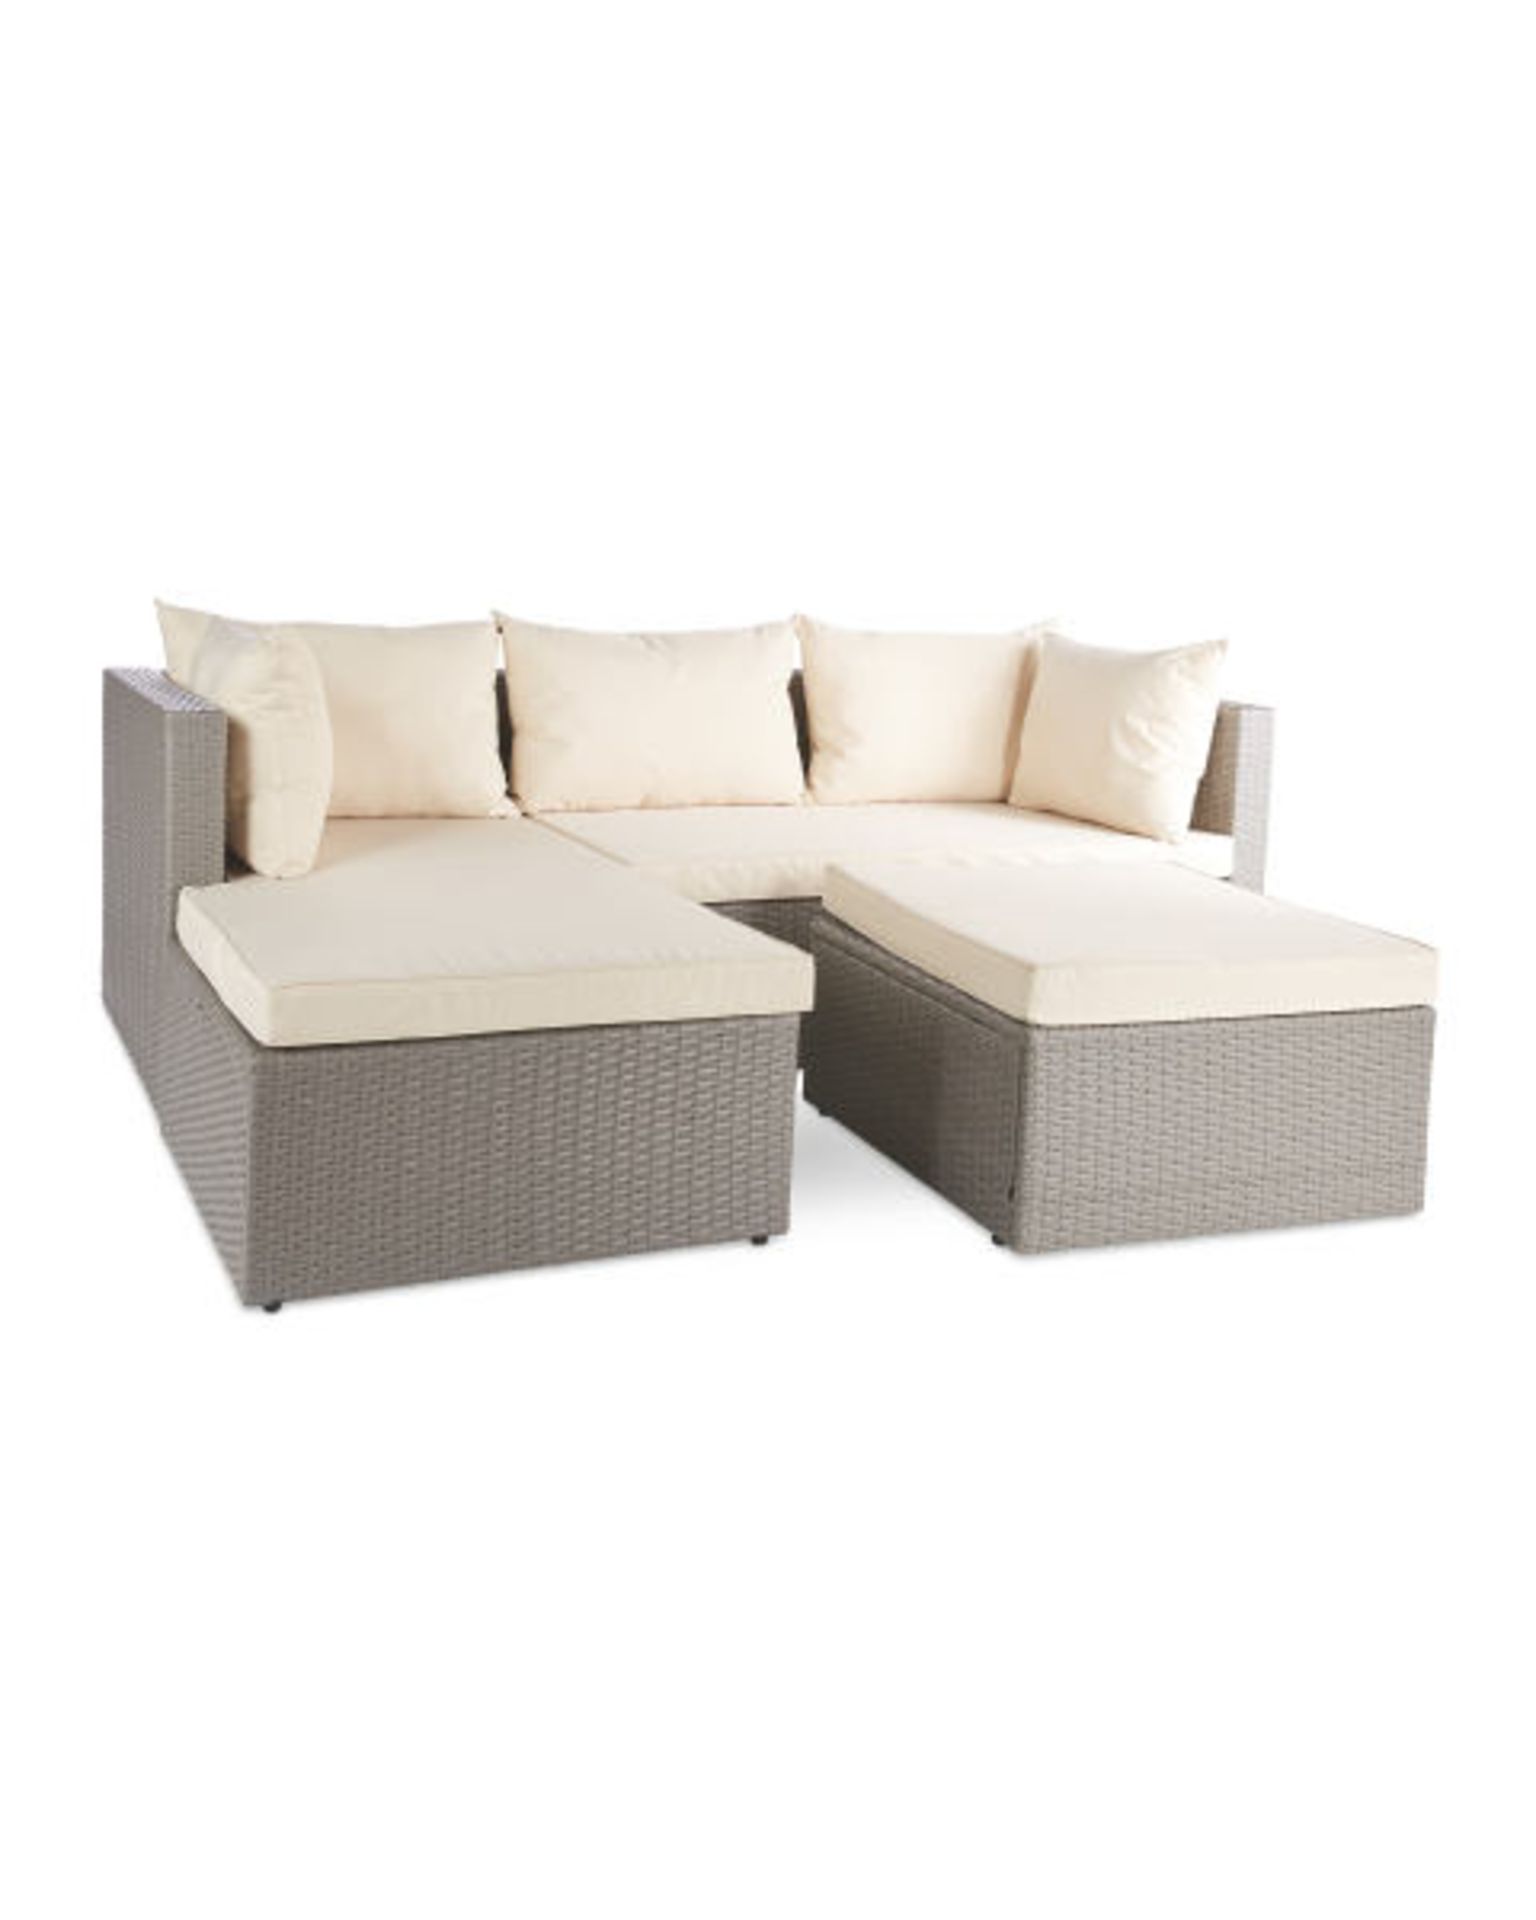 New & Boxed Luxury Grey & Cream Corner Sofa Set. Soak in the sun and feel that summer breeze while - Image 3 of 4